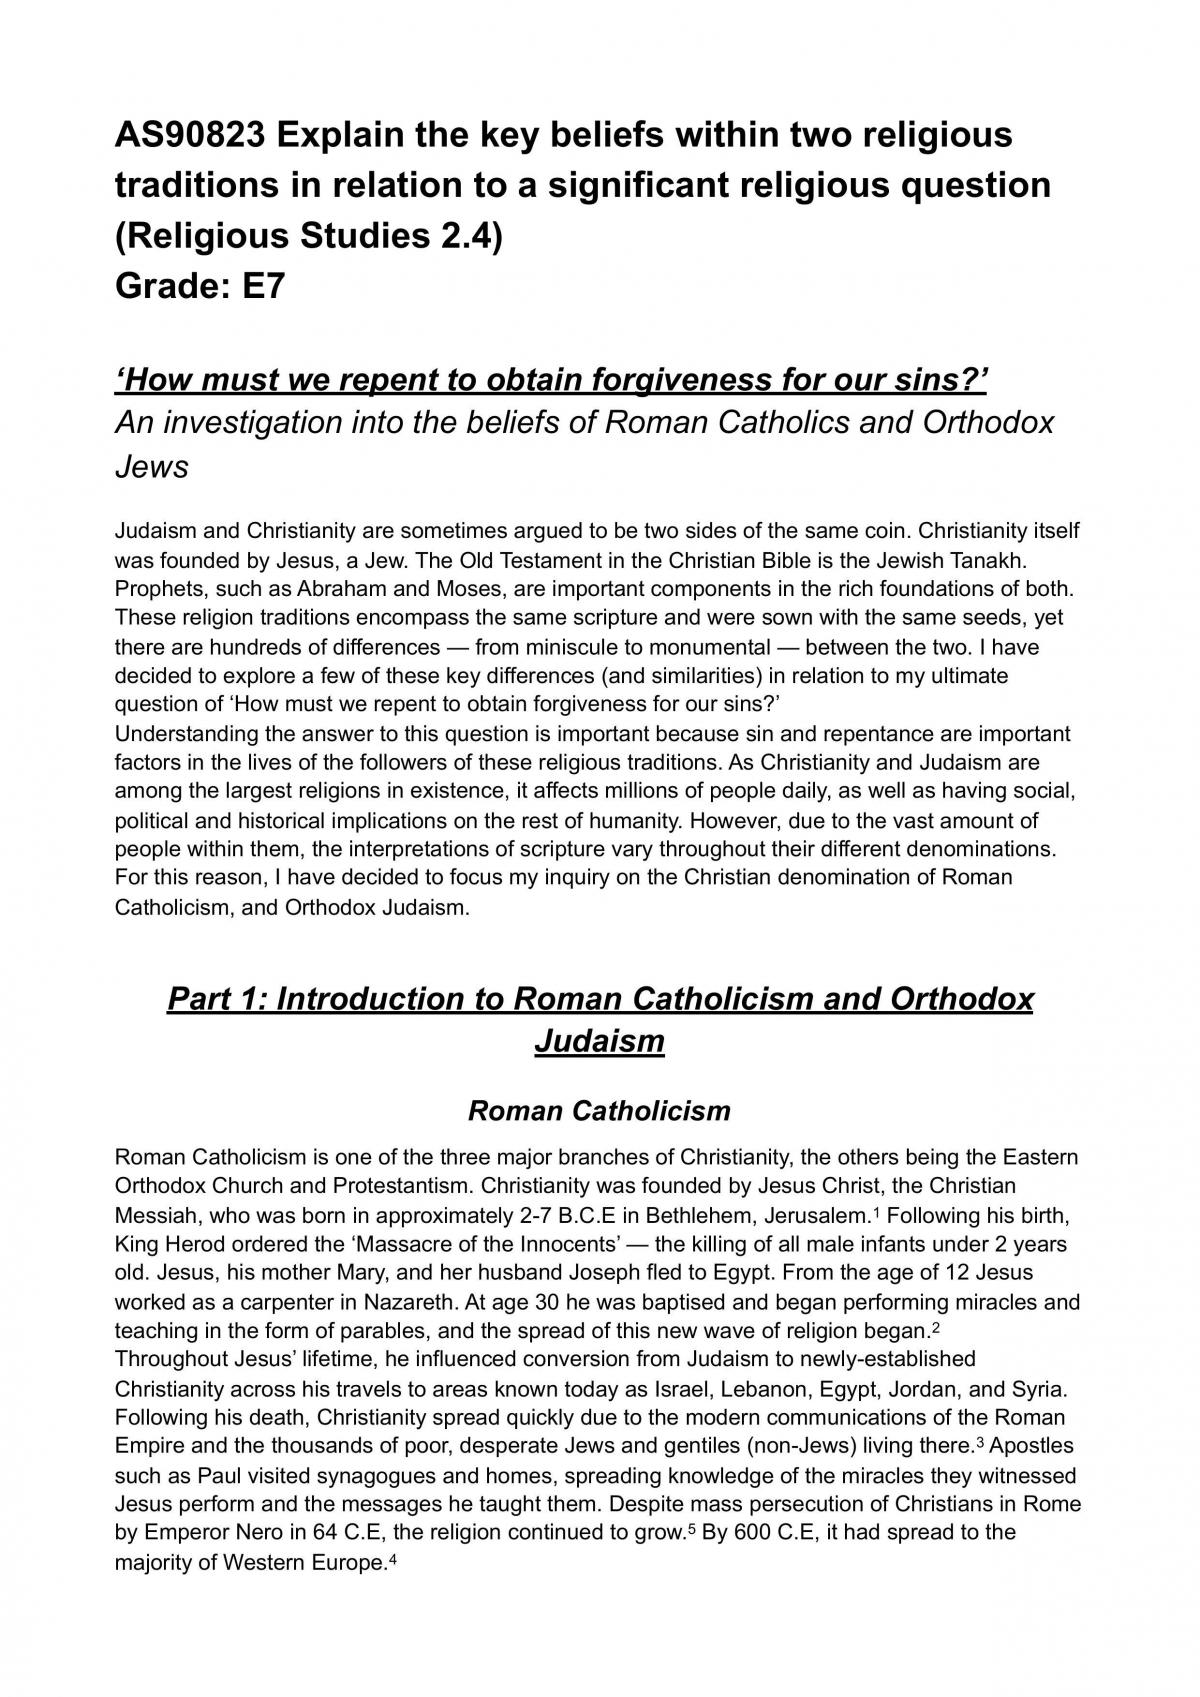 Religious Studies 2.4 investigation into the beliefs of Roman Catholics and Orthodox Jews  - Page 1